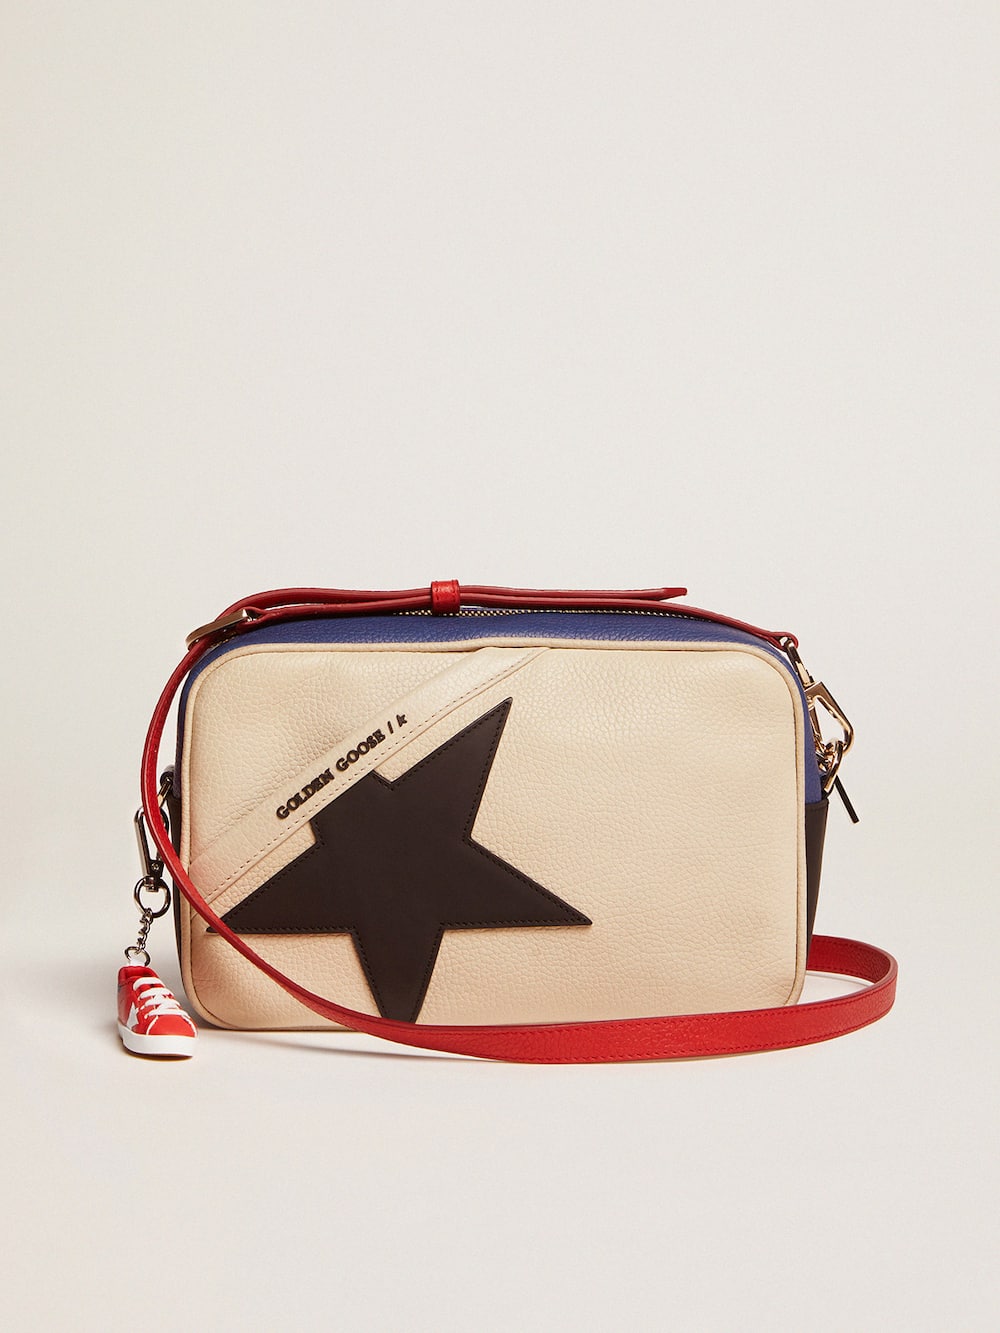 Golden Goose - Women's Star Bag in pebbled leather with black star in 